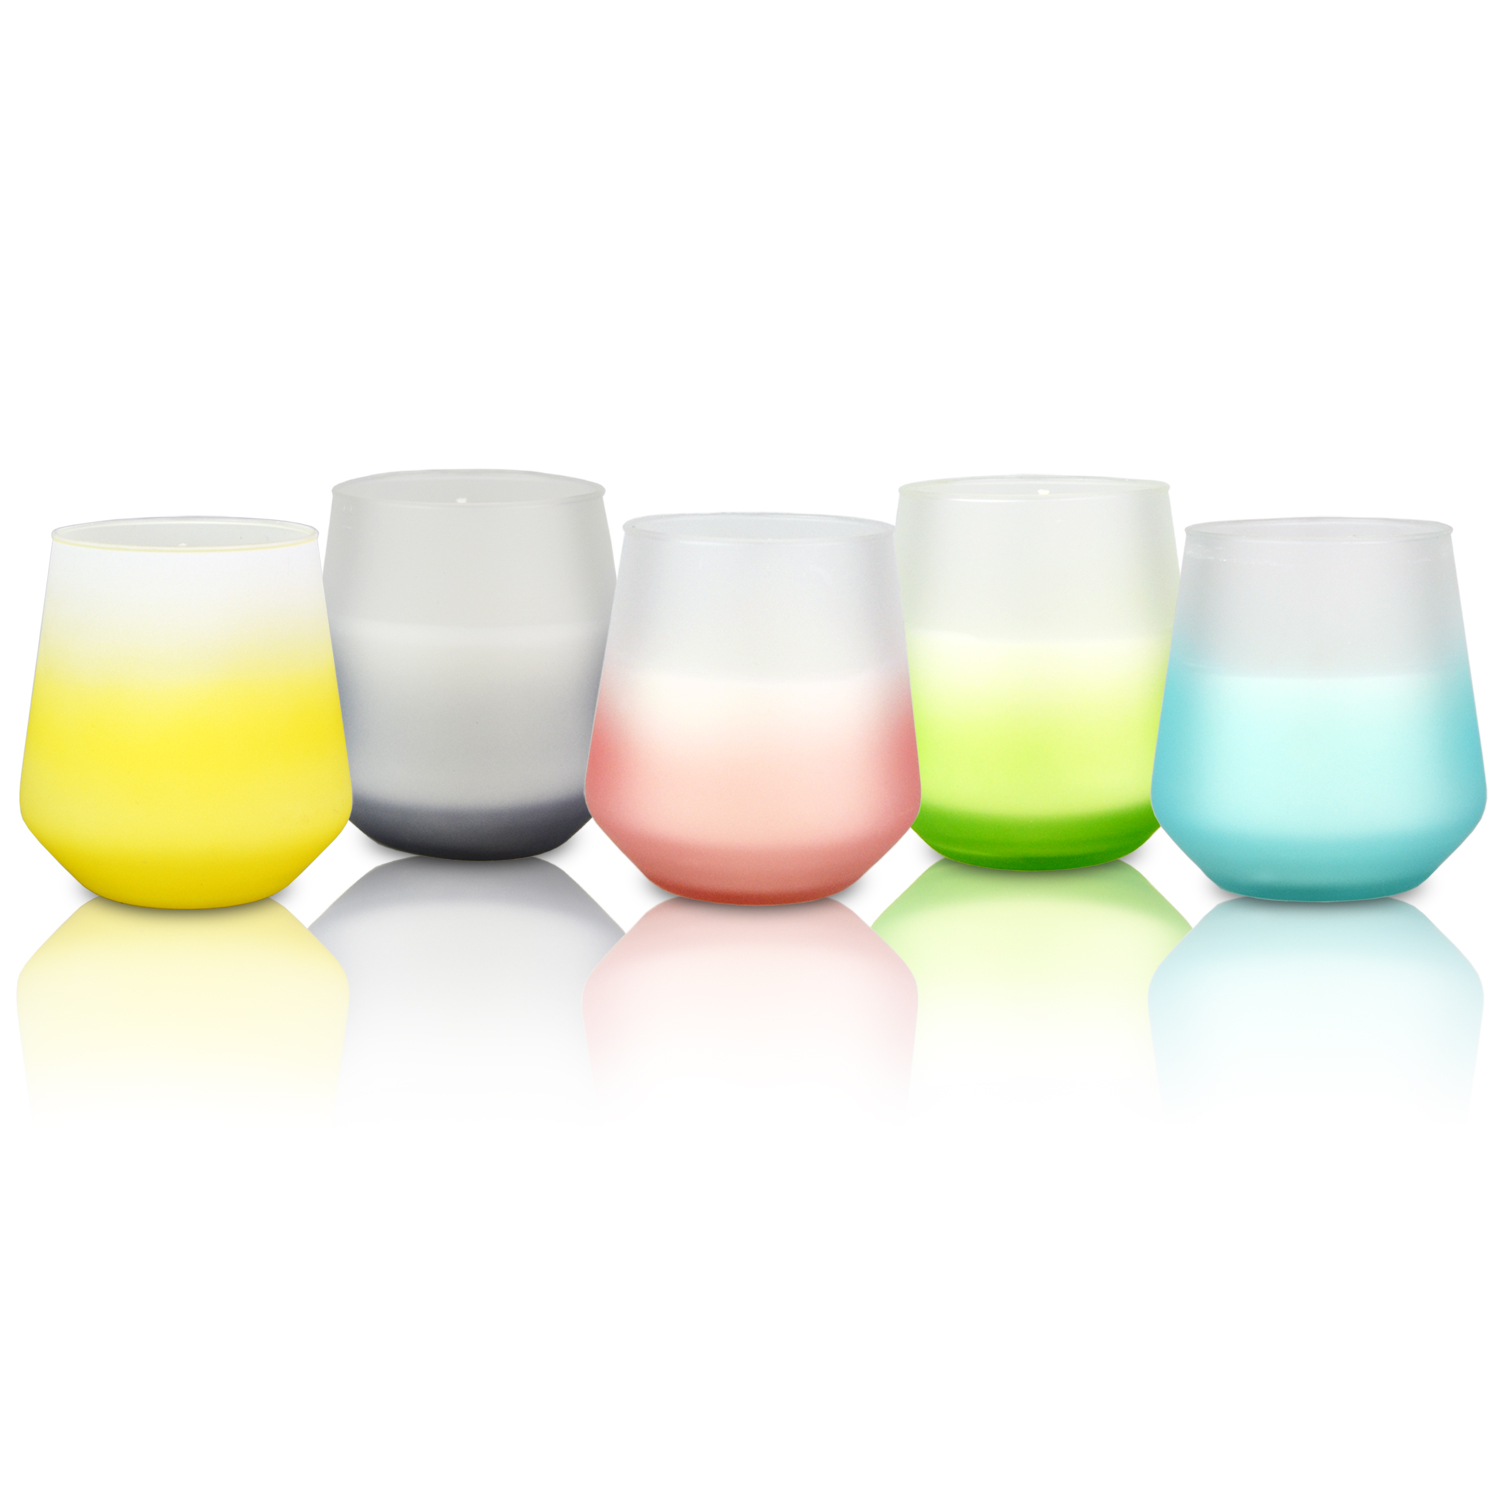 Thin shaped glass candle